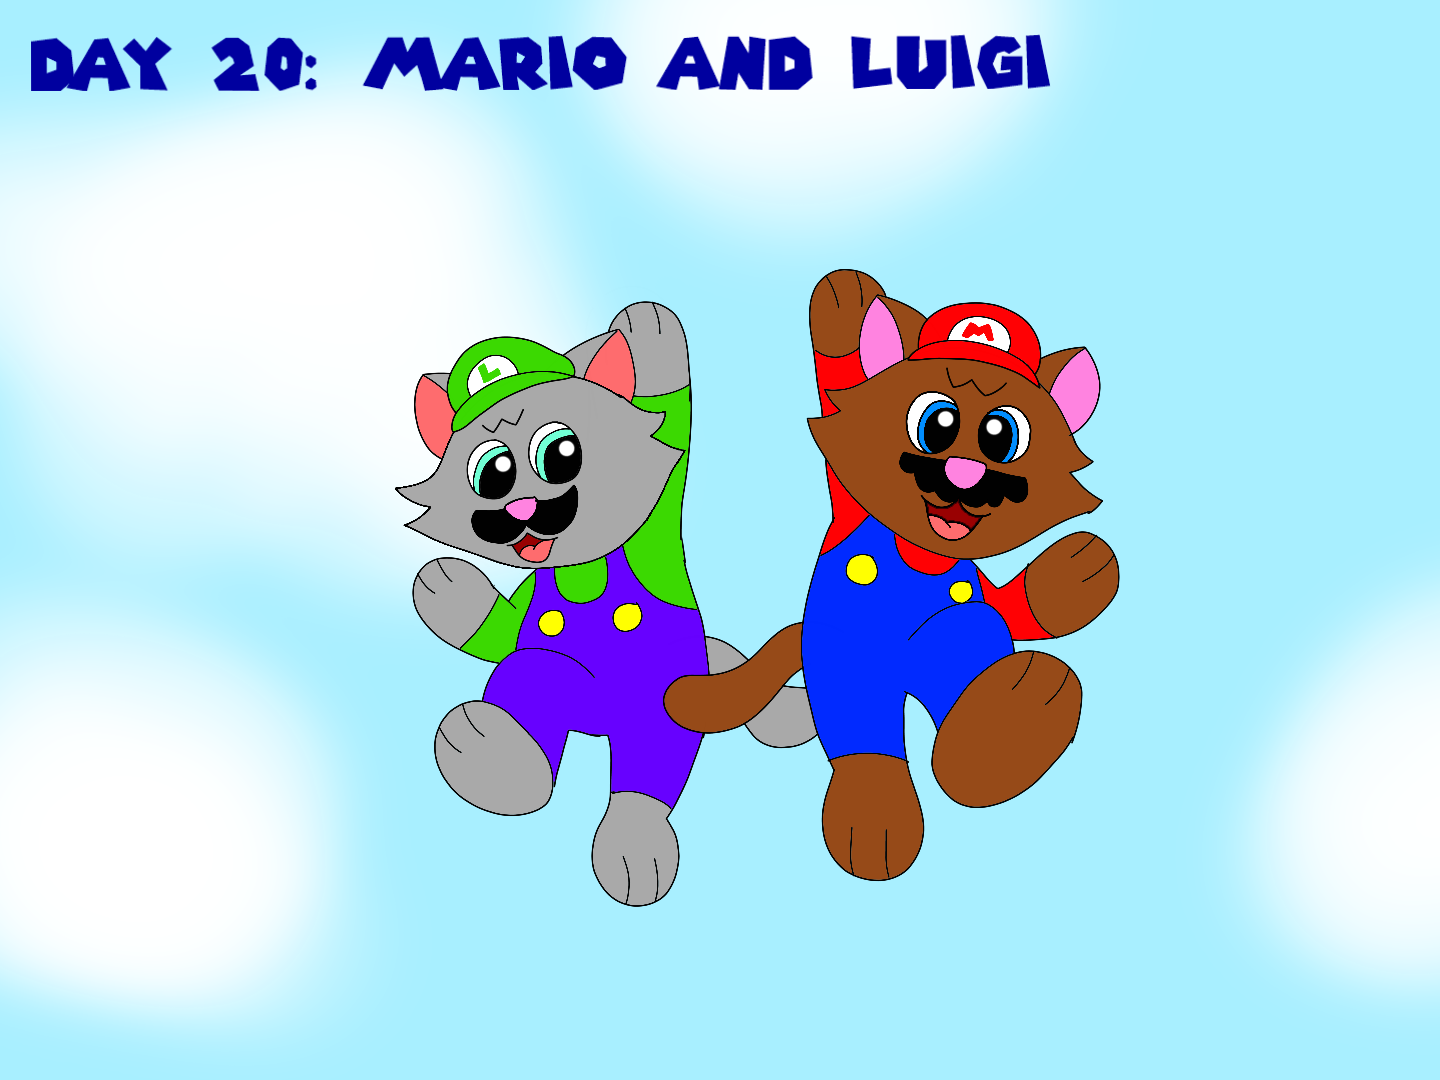 Super Mario Cat - Day 4: Tree by Rebow19-64 on DeviantArt